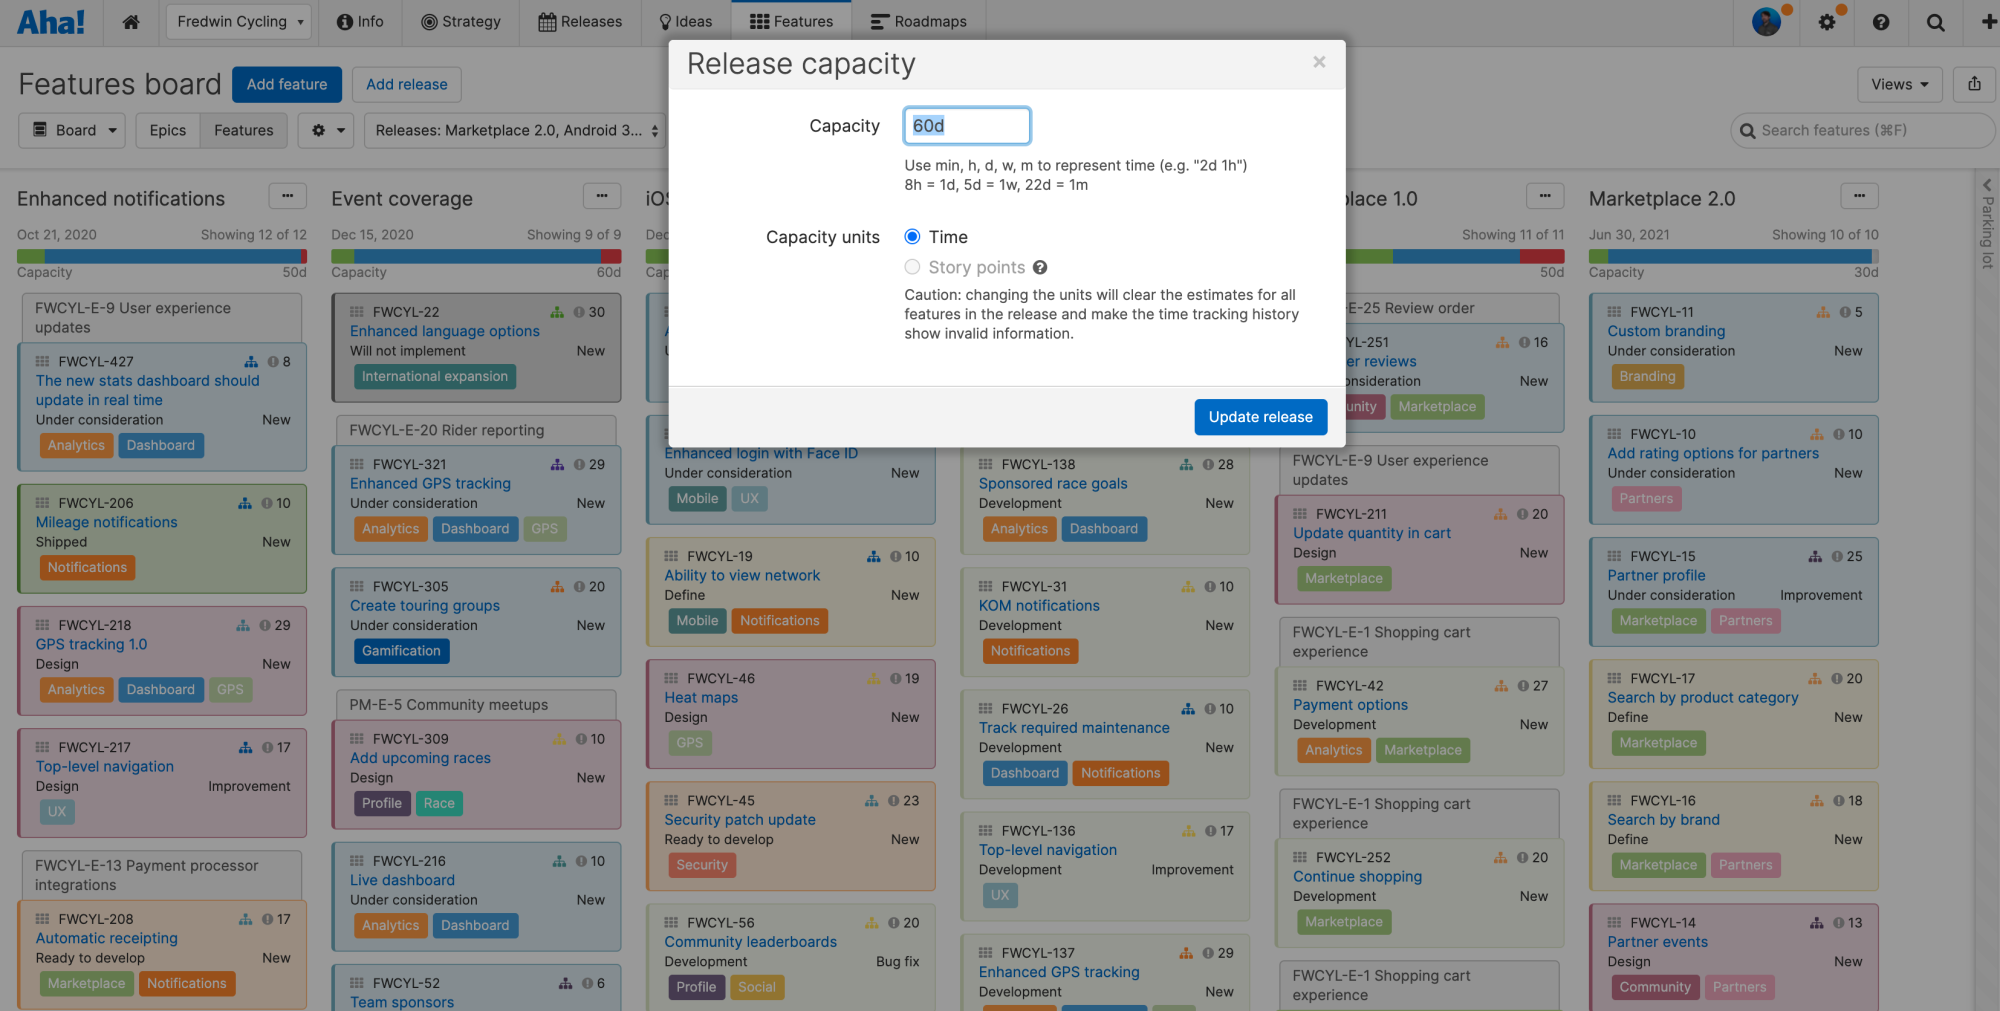 The release capacity modal in front of the features board